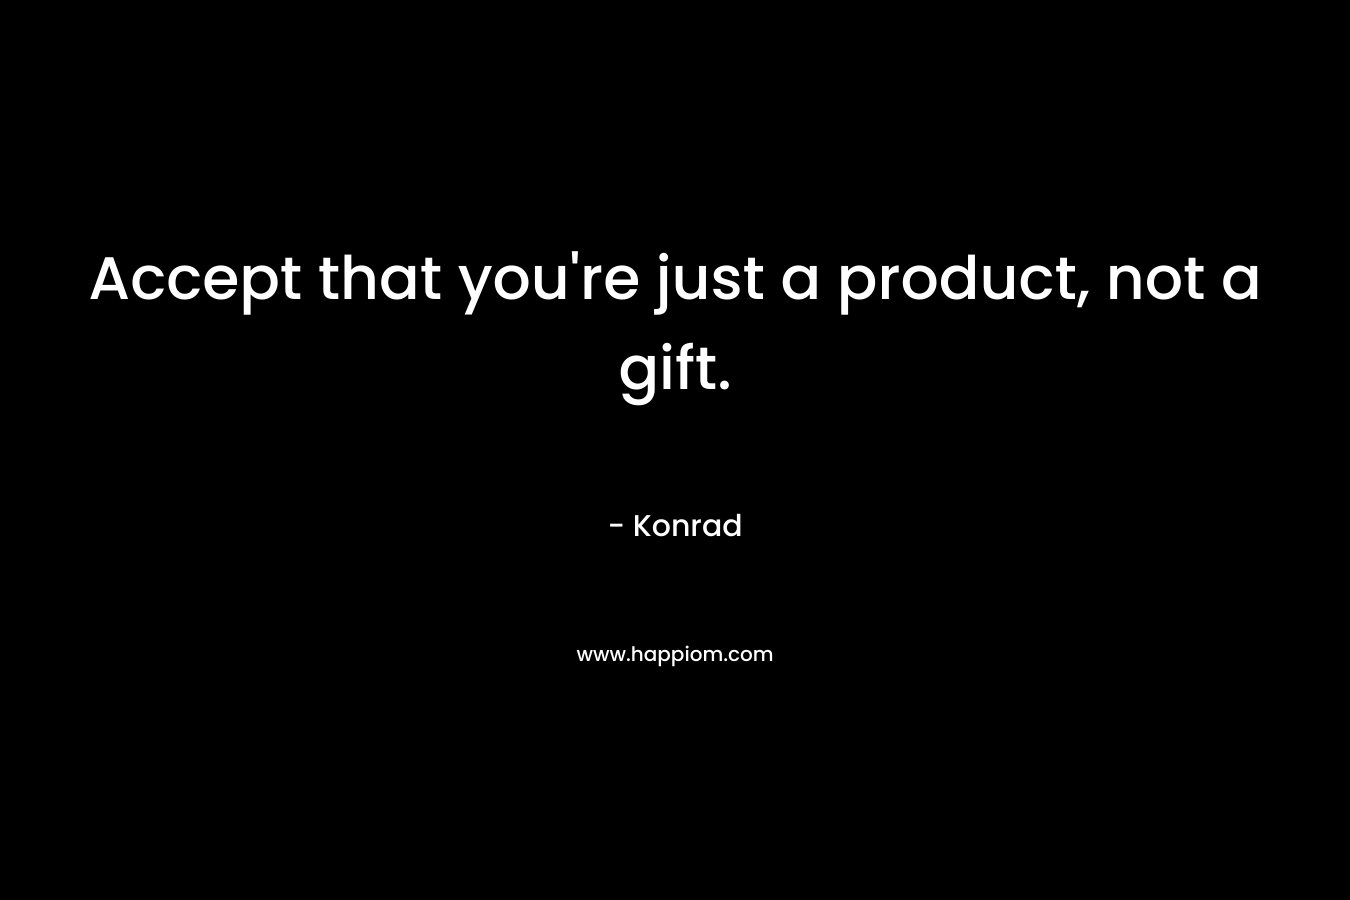 Accept that you're just a product, not a gift.